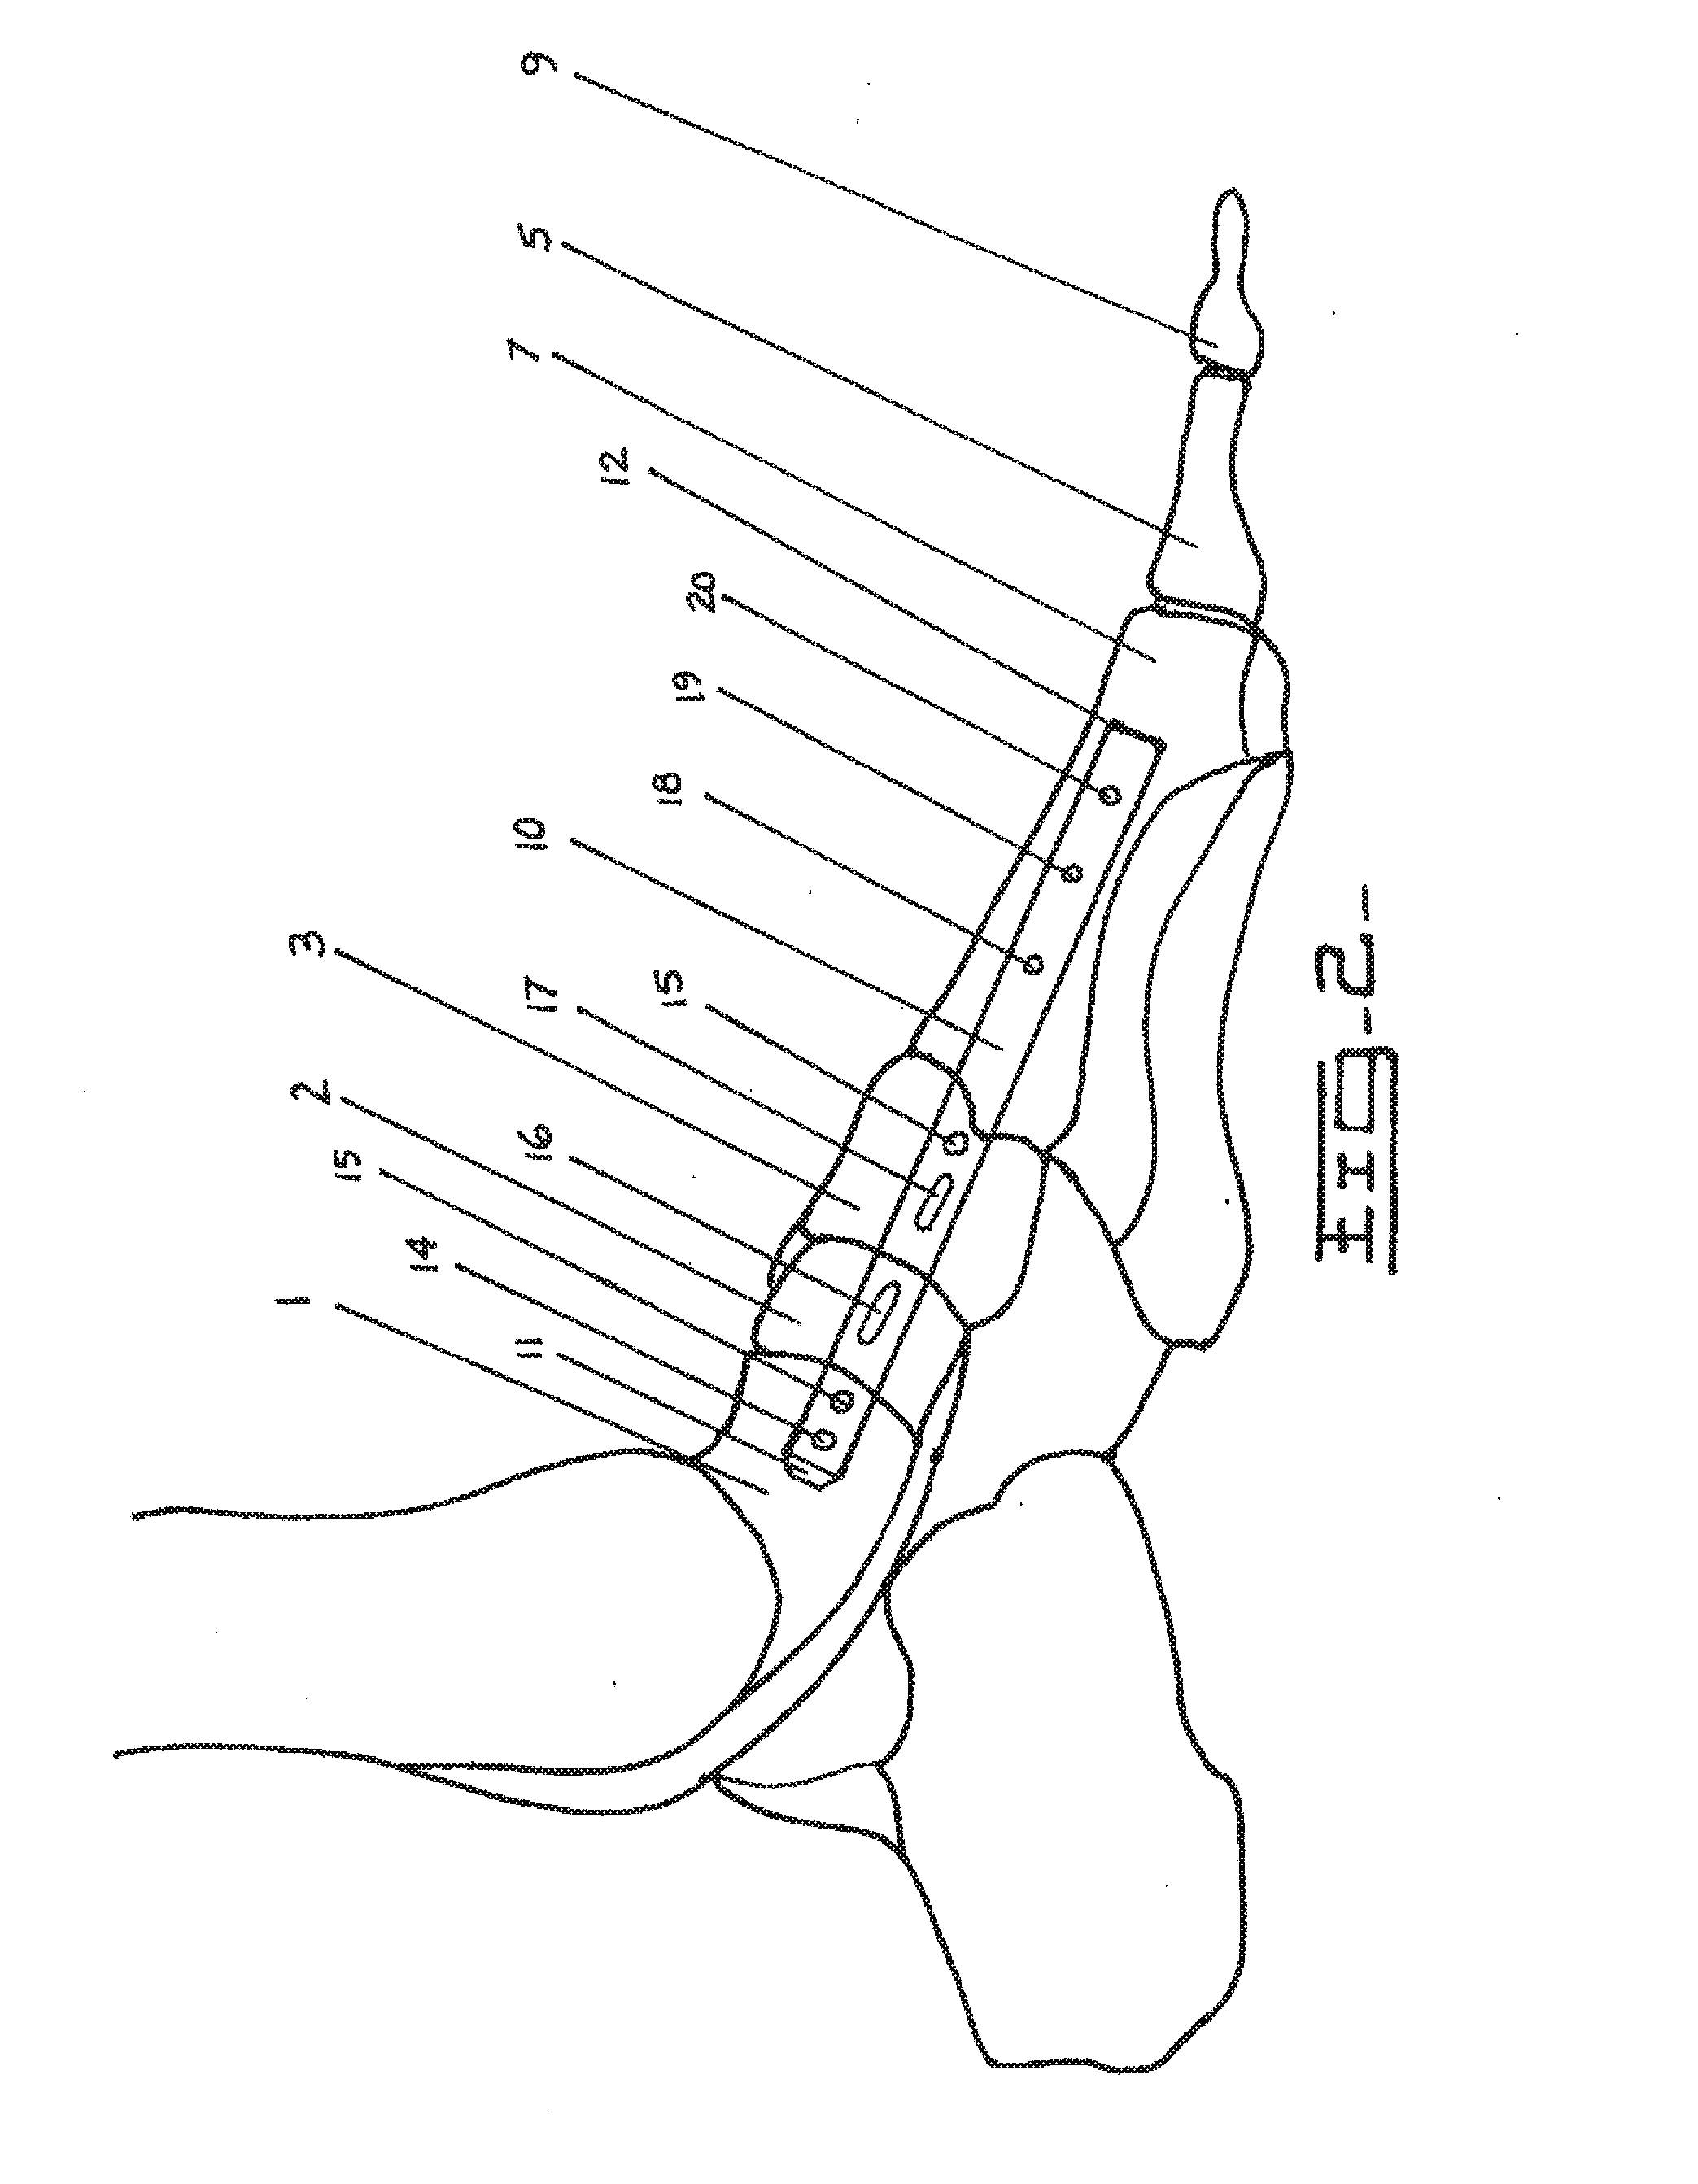 Method and Apparatus for Repairing the Mid-Foot Region Via an Intramedullary Nail